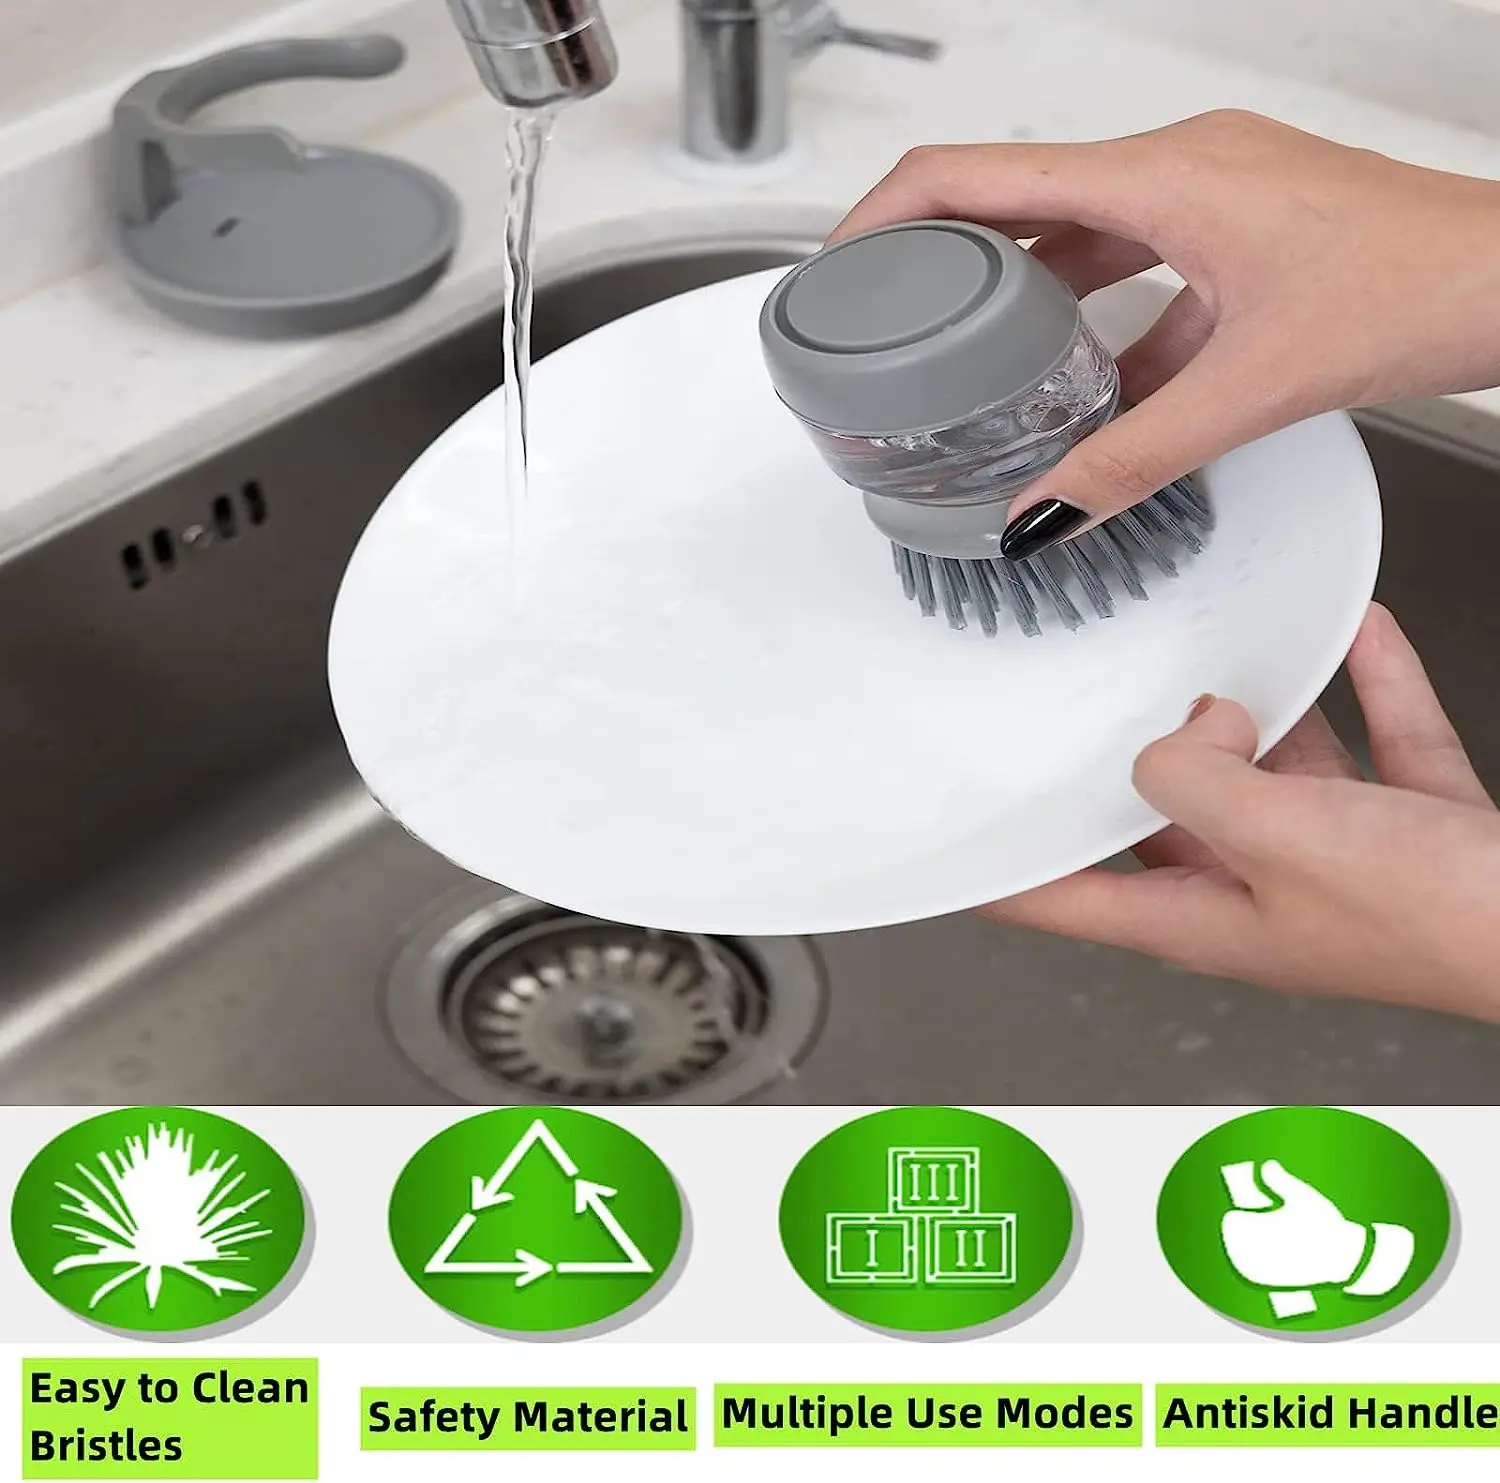 

Kitchen Tool Dish Scrub Brush with Soap Dispenser Holder Dishwashing Removable Cleaning Brushes Scrubber for Dishes Pots Pans